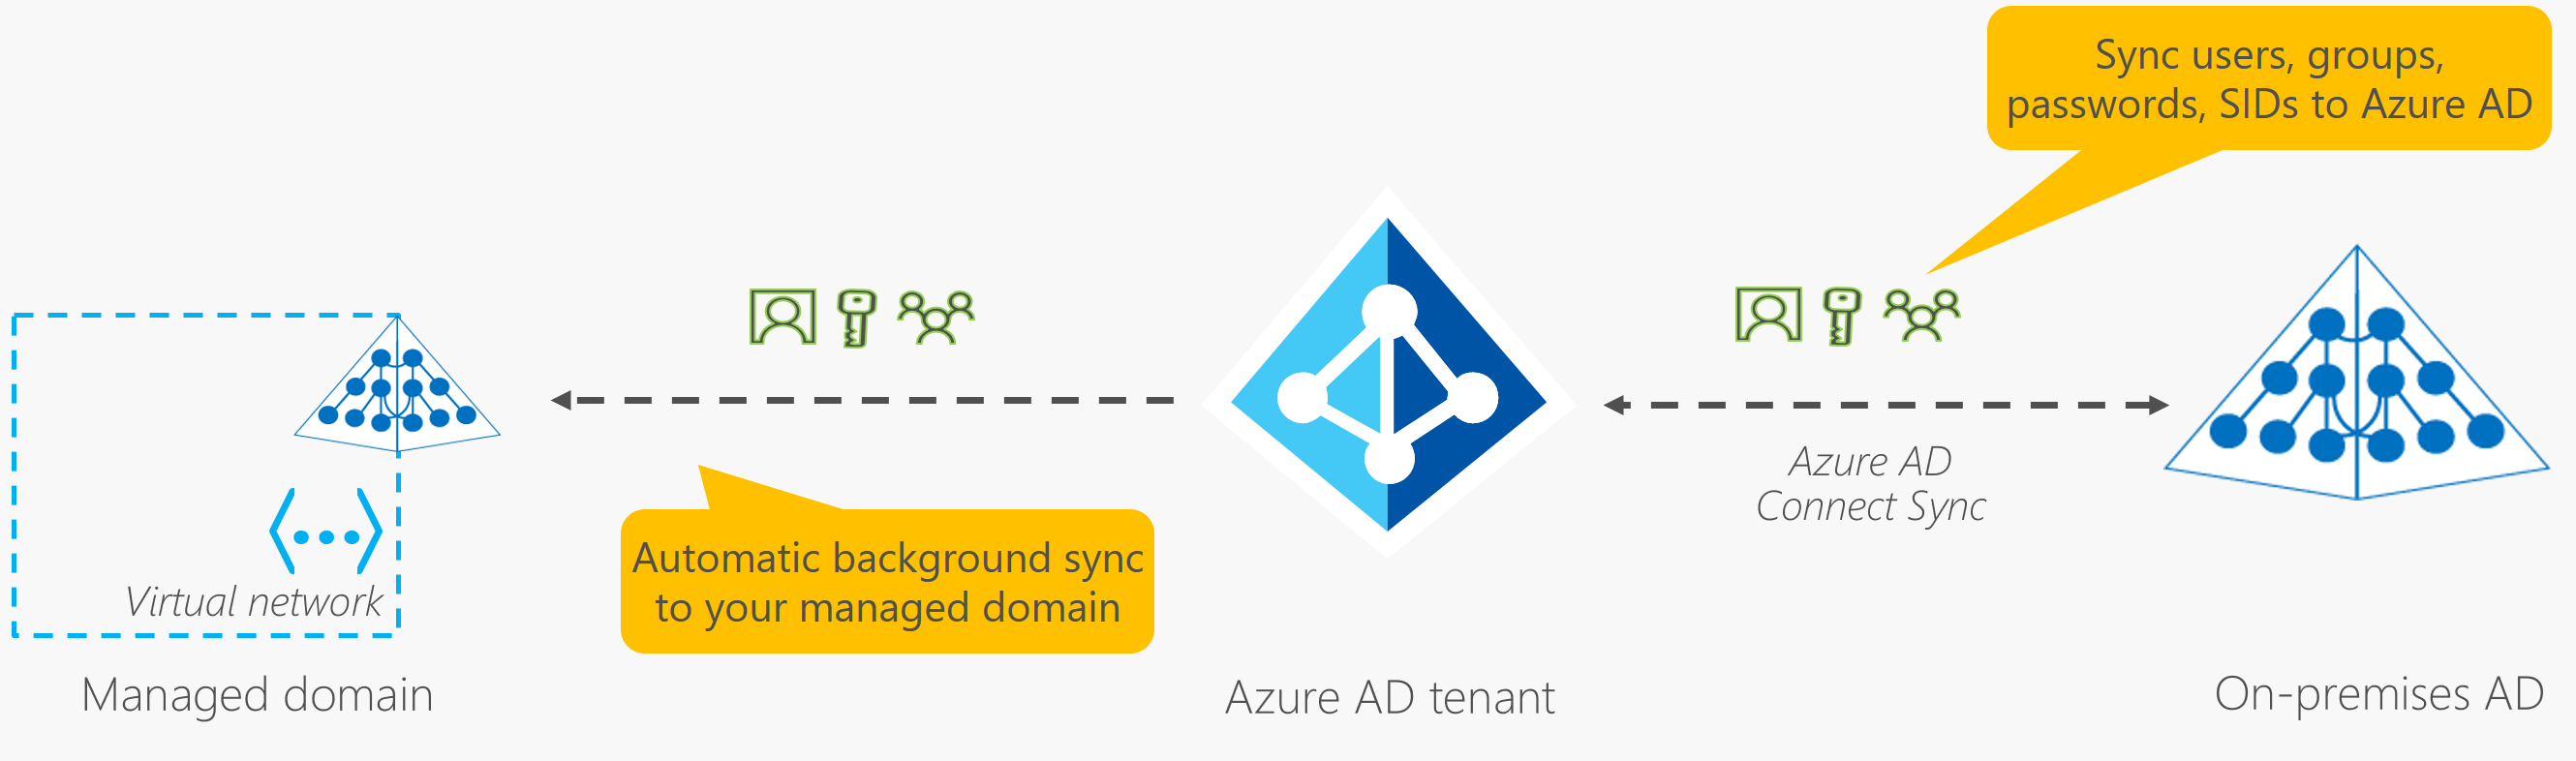 Synkronisering i Azure AD Domain Services med Azure AD och lokal AD DS med AD Connect